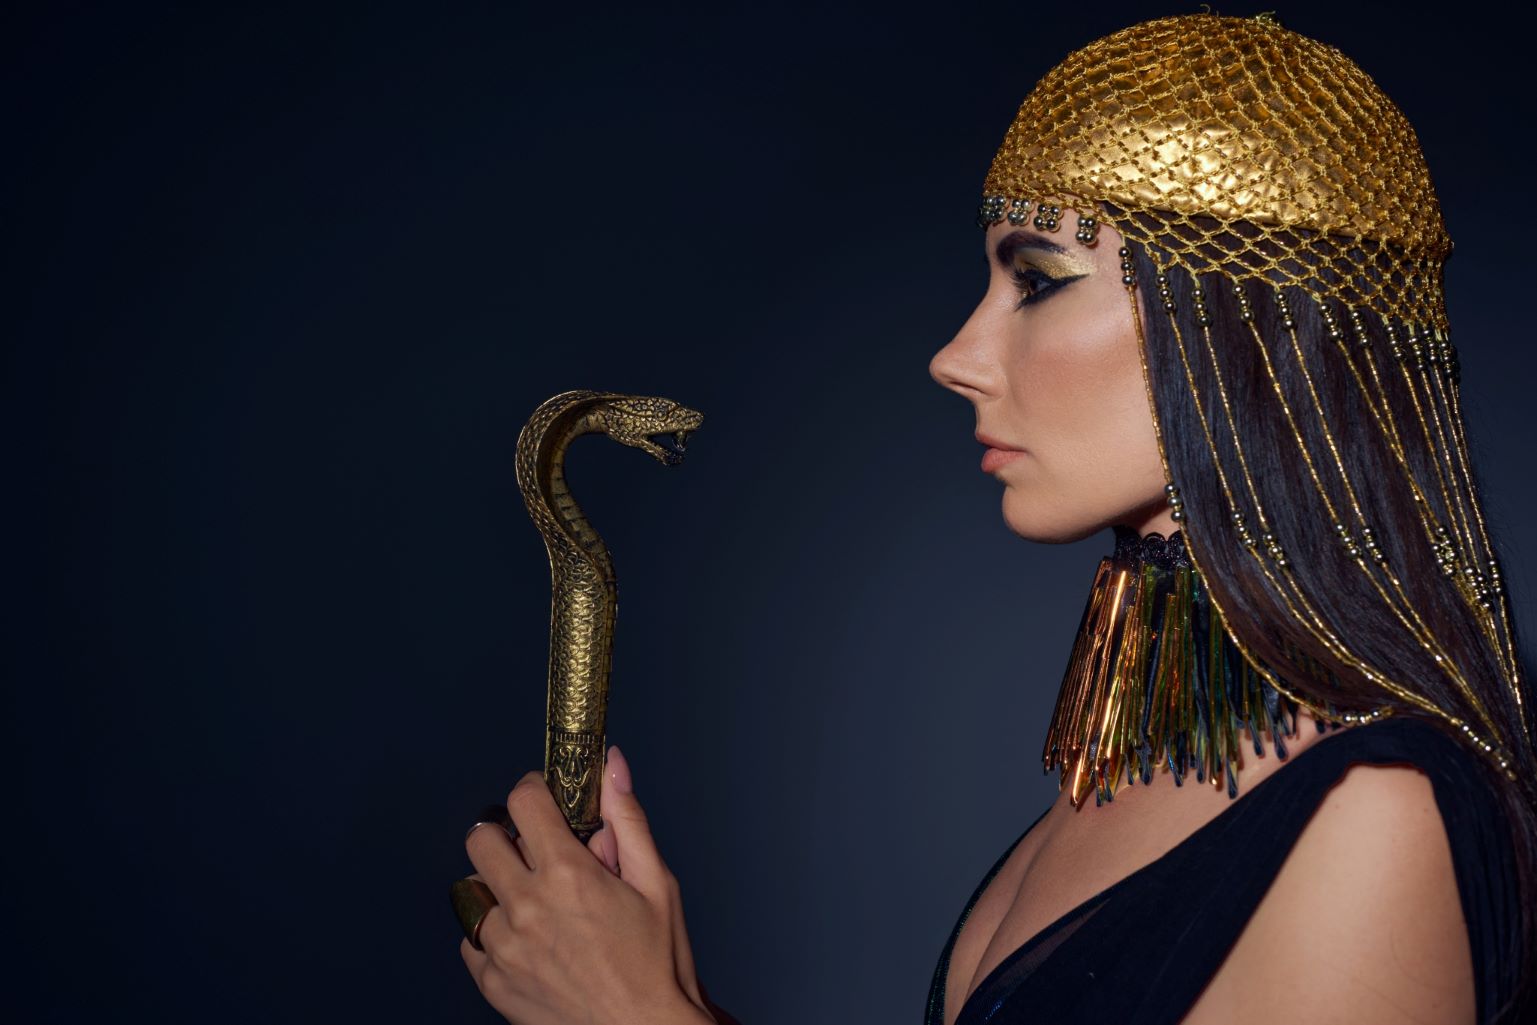 Side view of woman in Egyptian attire.